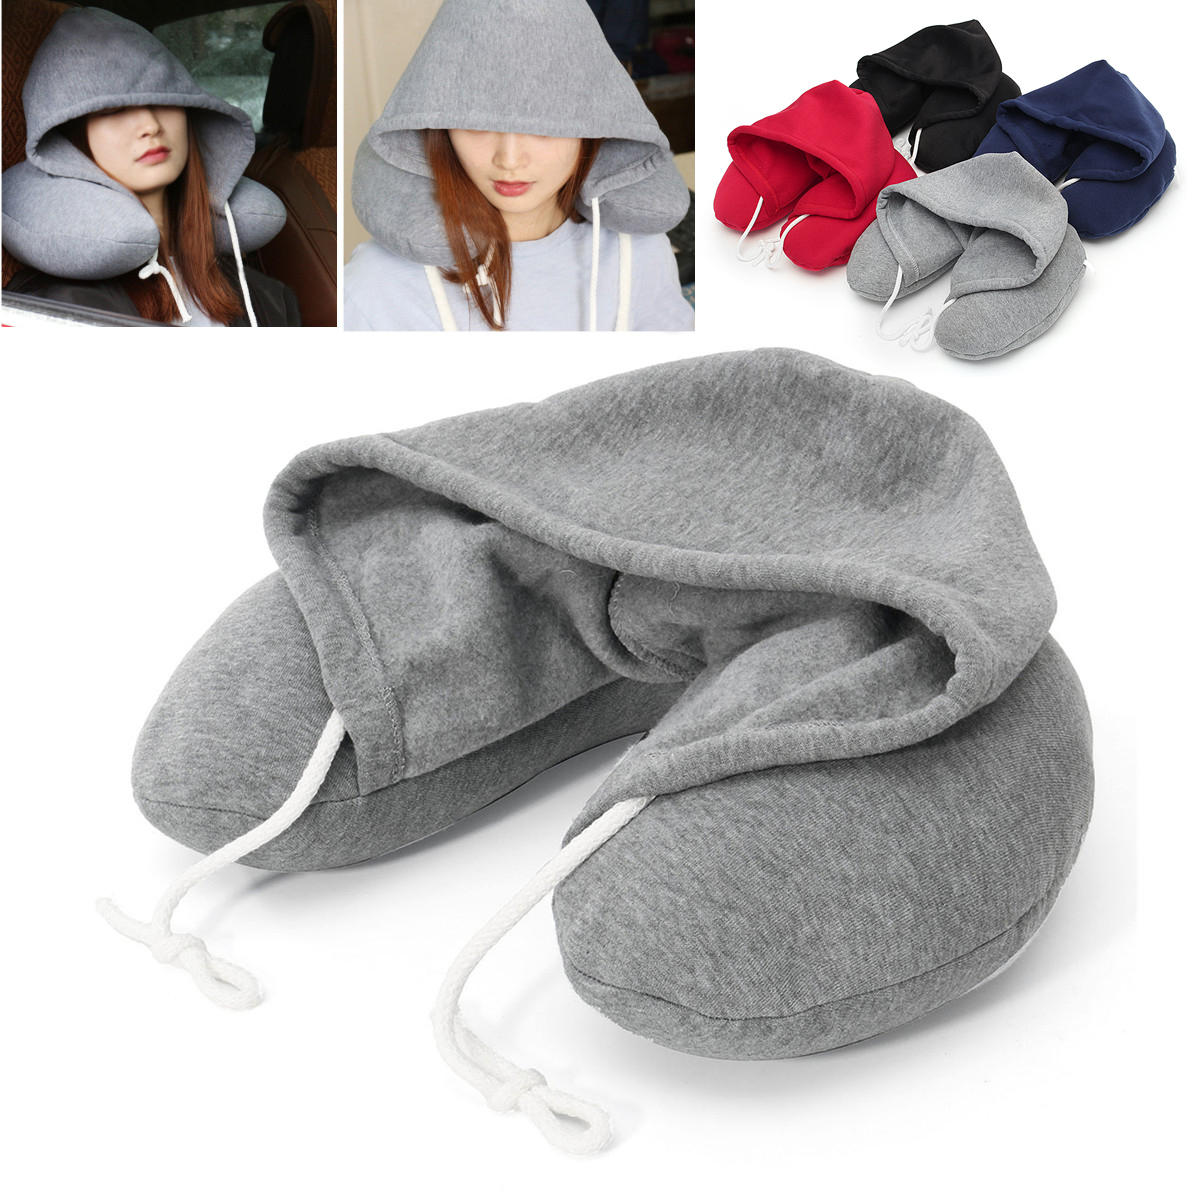 U-Shaped-Hooded-Pillow-Cushion-Winter-Warm-Hat-Rest-Neck-Support-Winter-Warm-1243401-1